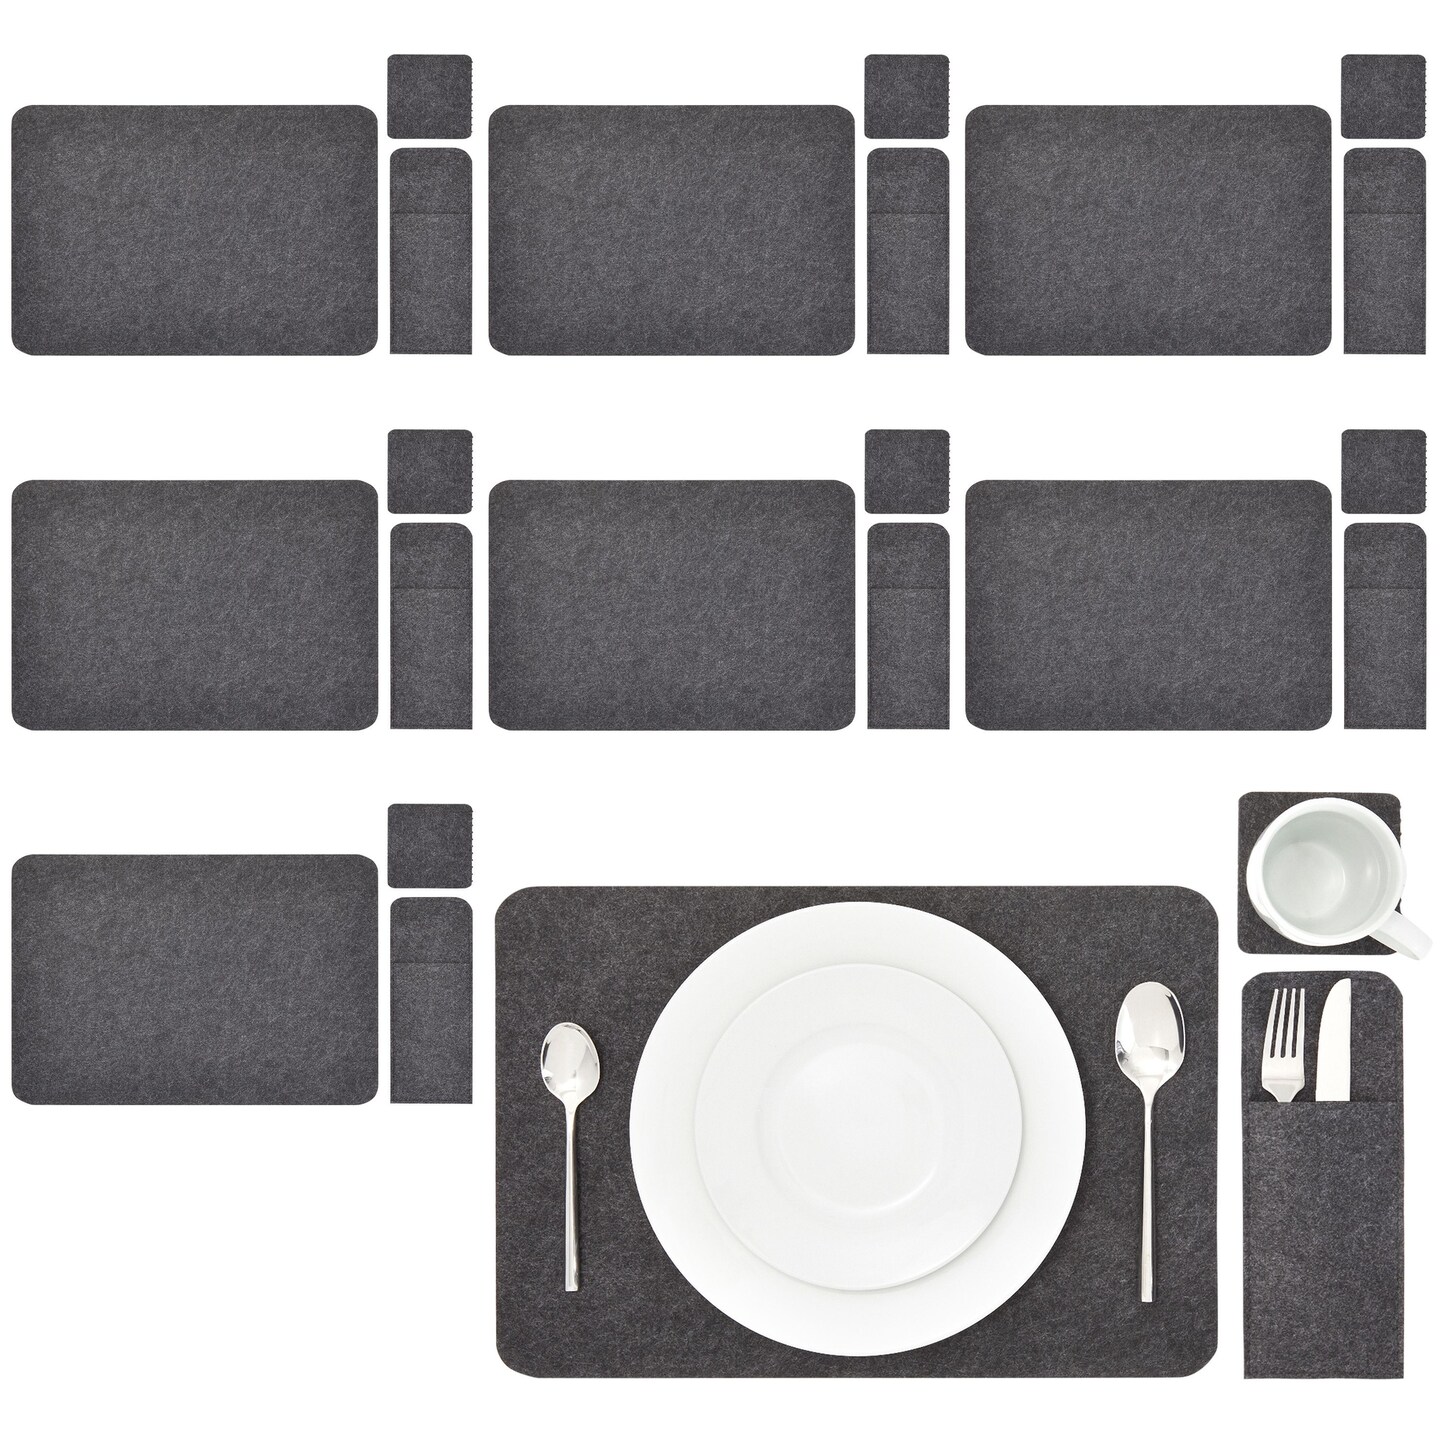 Felt Table Placemats Set of 8 for Dining Table and Kitchen Decor with Drink Coasters and Cutlery Pouches (Gray, 24 Pieces)